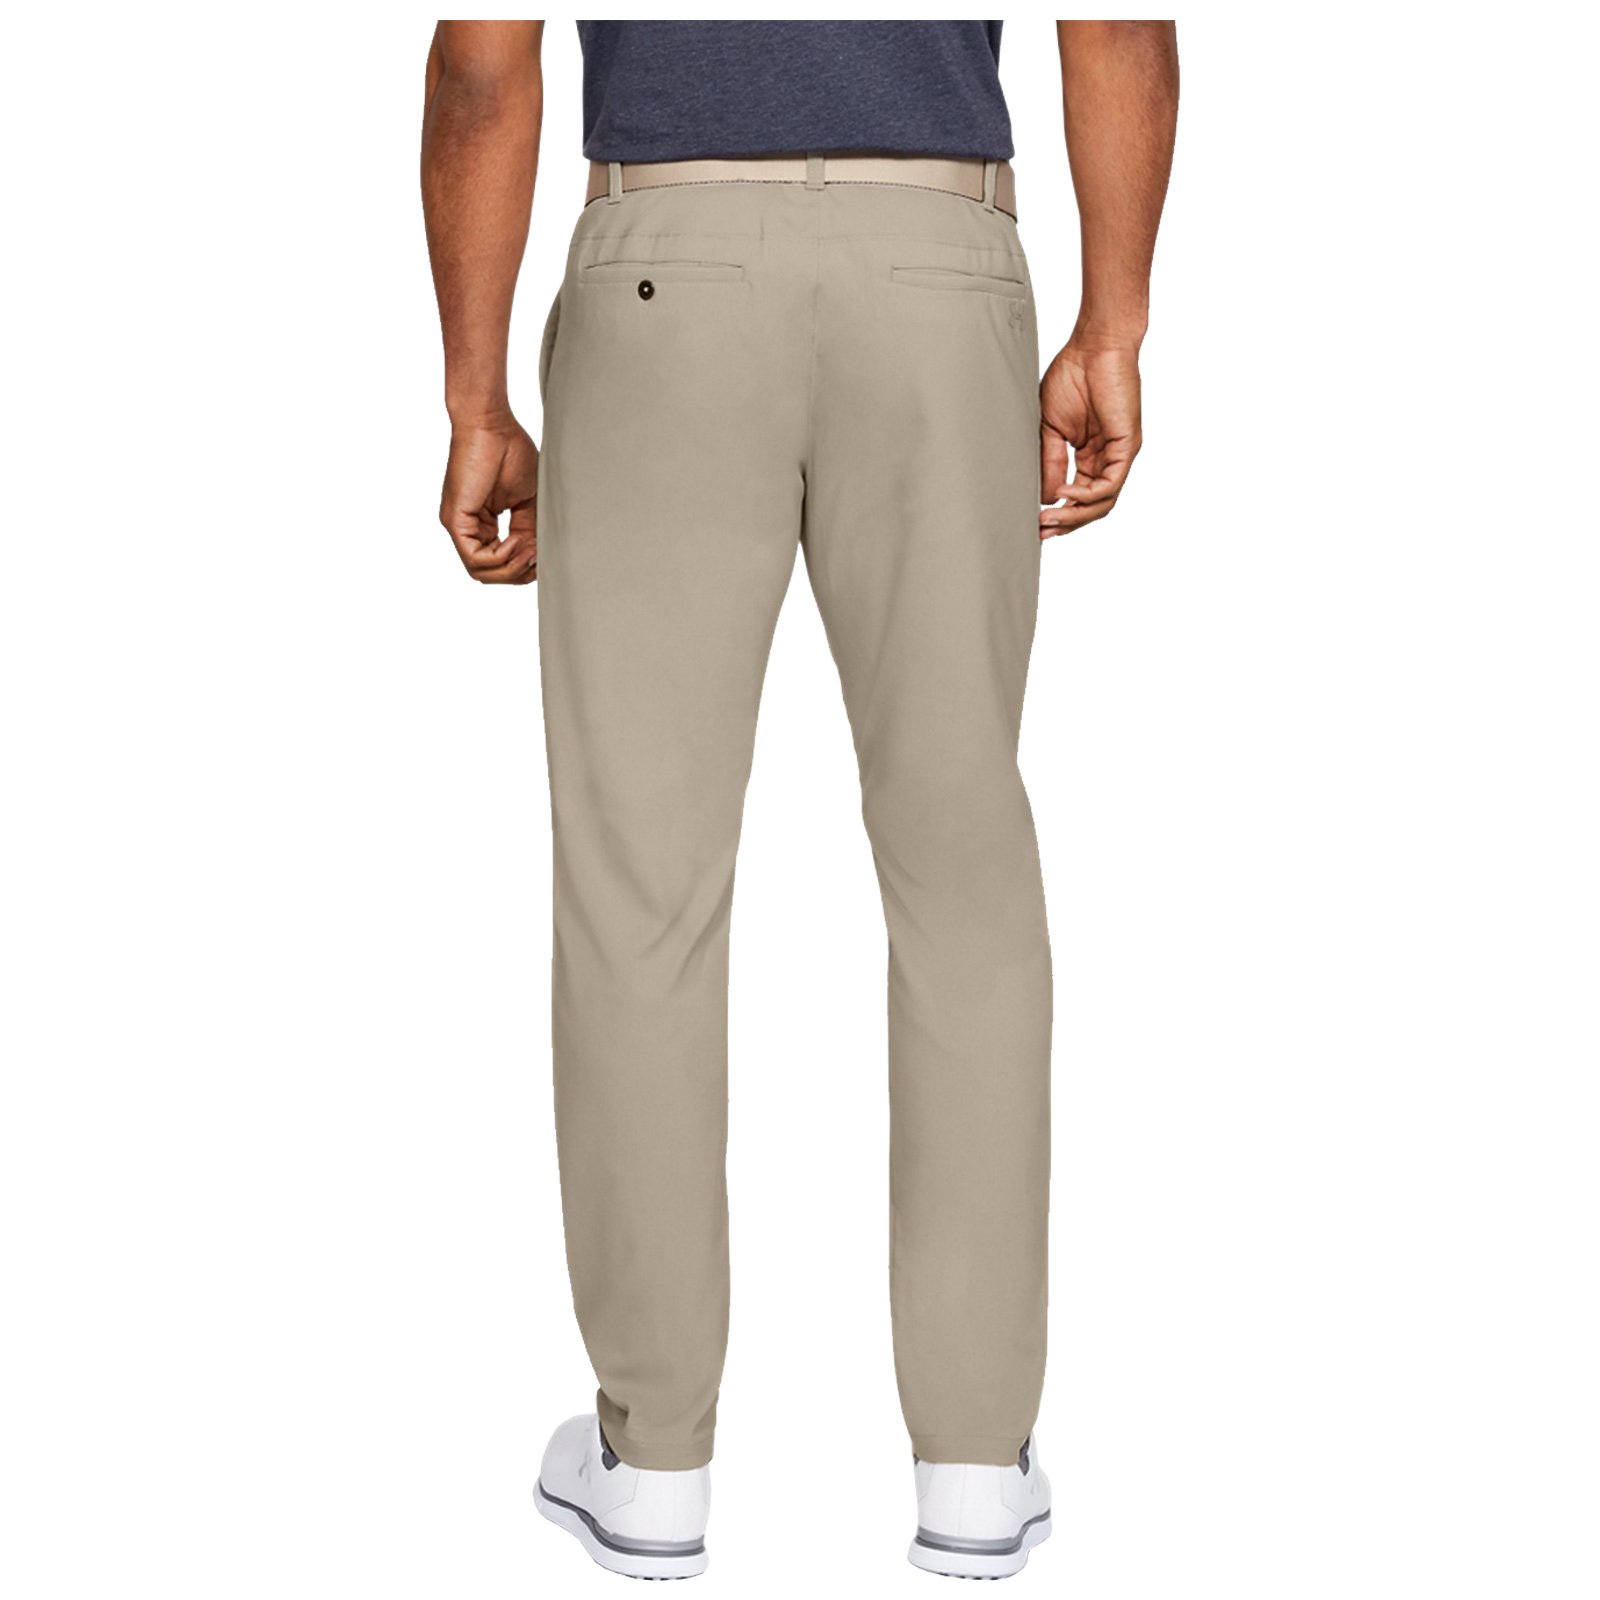 2021 Under Armour Mens Showdown Tapered Leg Trousers UA Golf Flat Front Pants | eBay